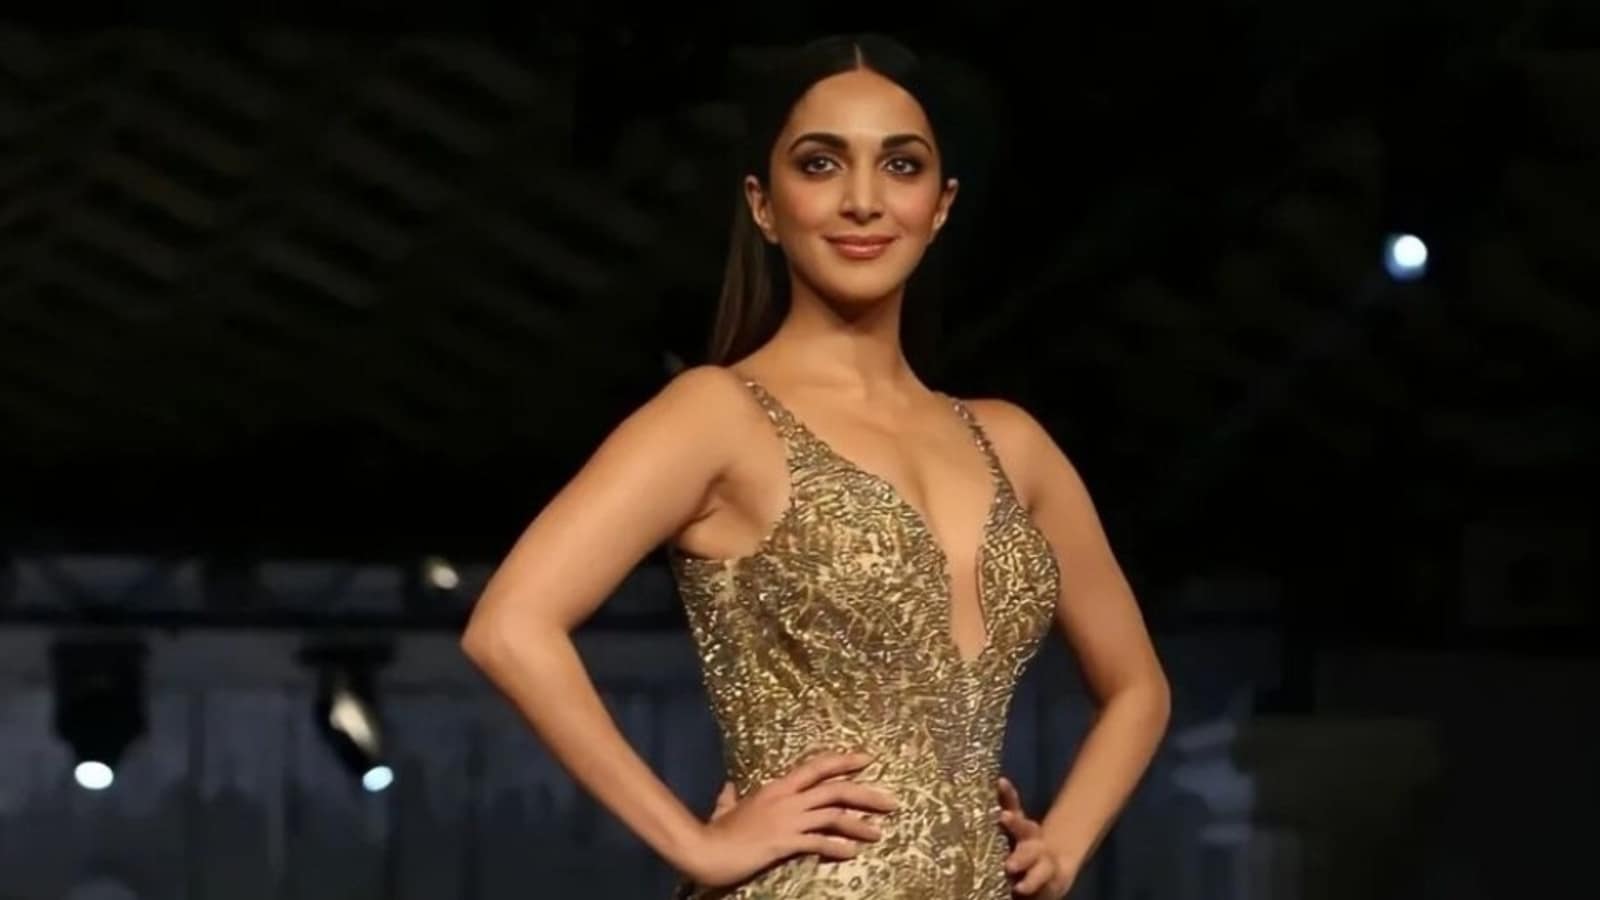 Kiara Advani burns the ramp as showstopper in a deep-neck gold gown for an  event in Delhi: All pics, videos inside | Fashion Trends - Hindustan Times